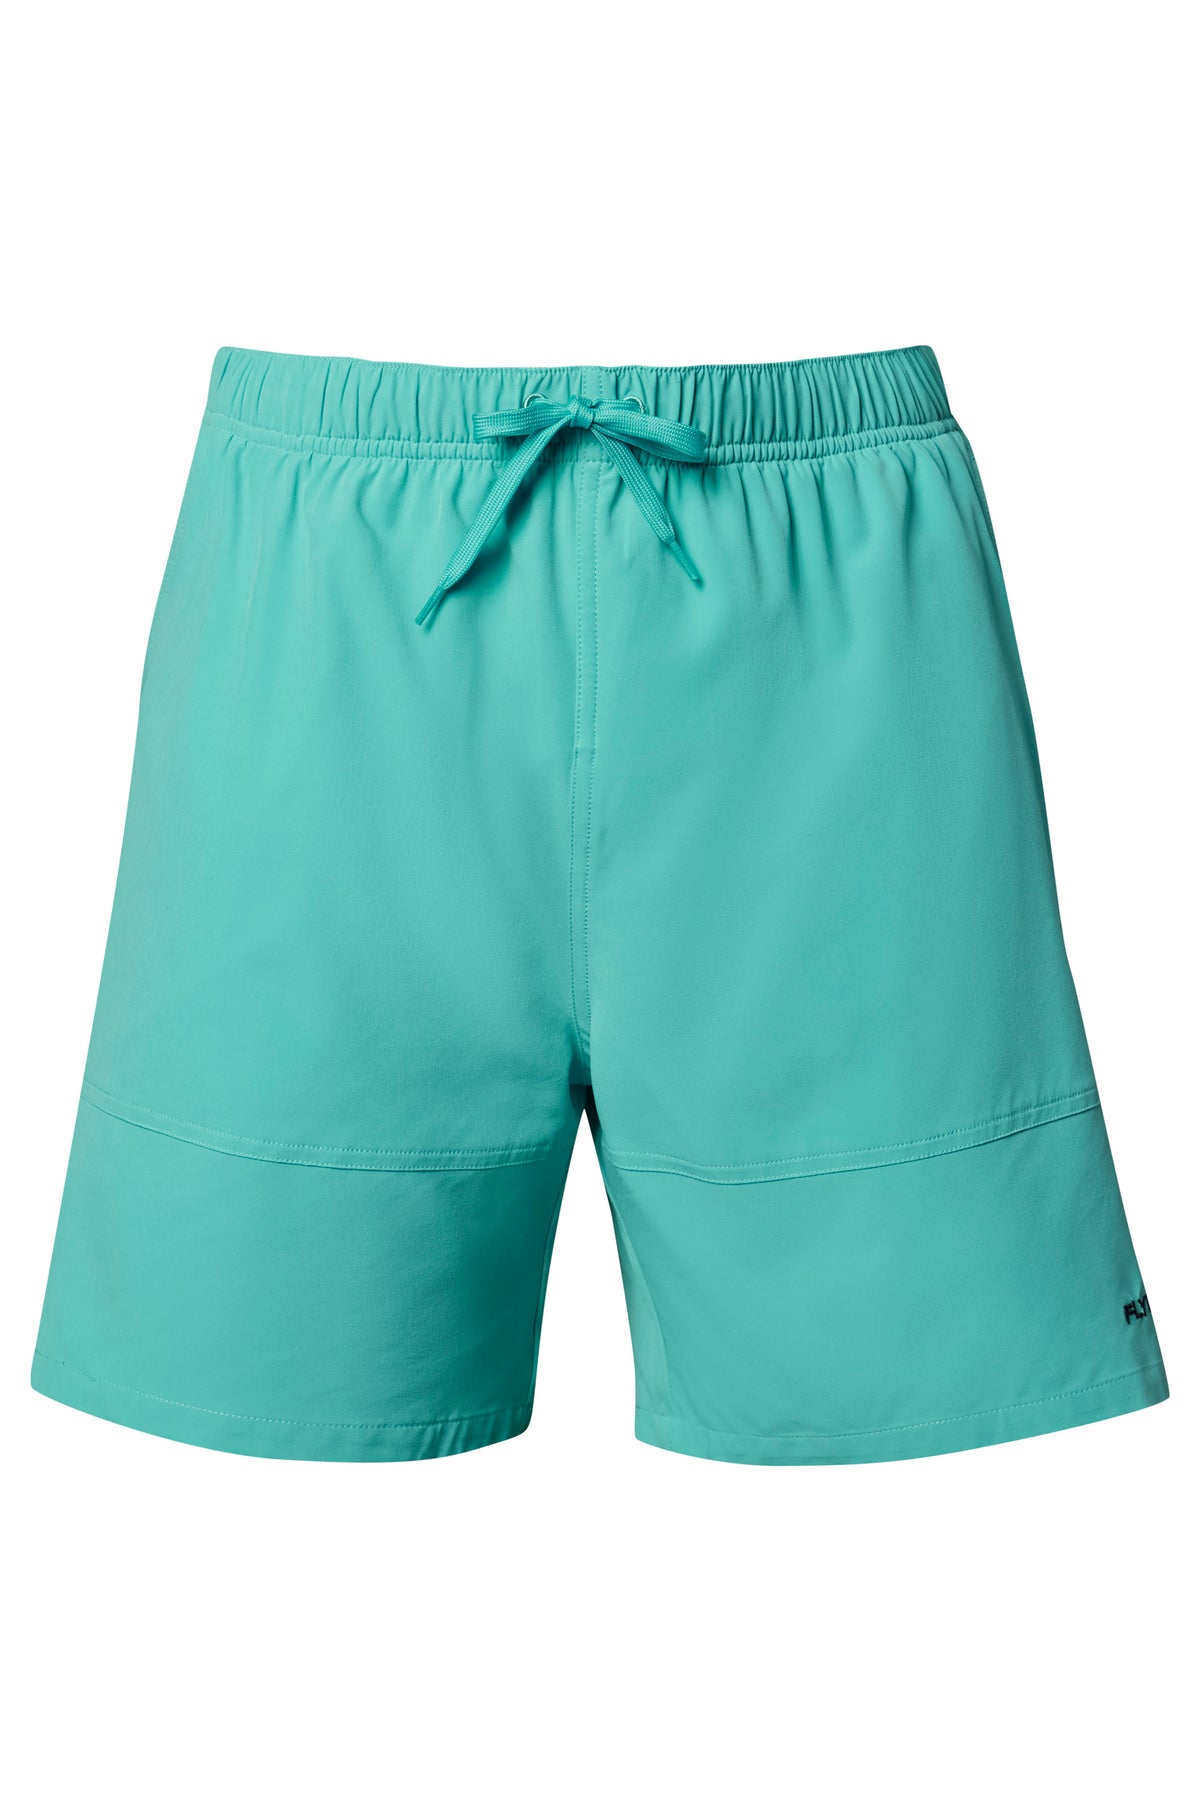 Everyday Happiness Olive Green Linen Shorts – Shop the Mint